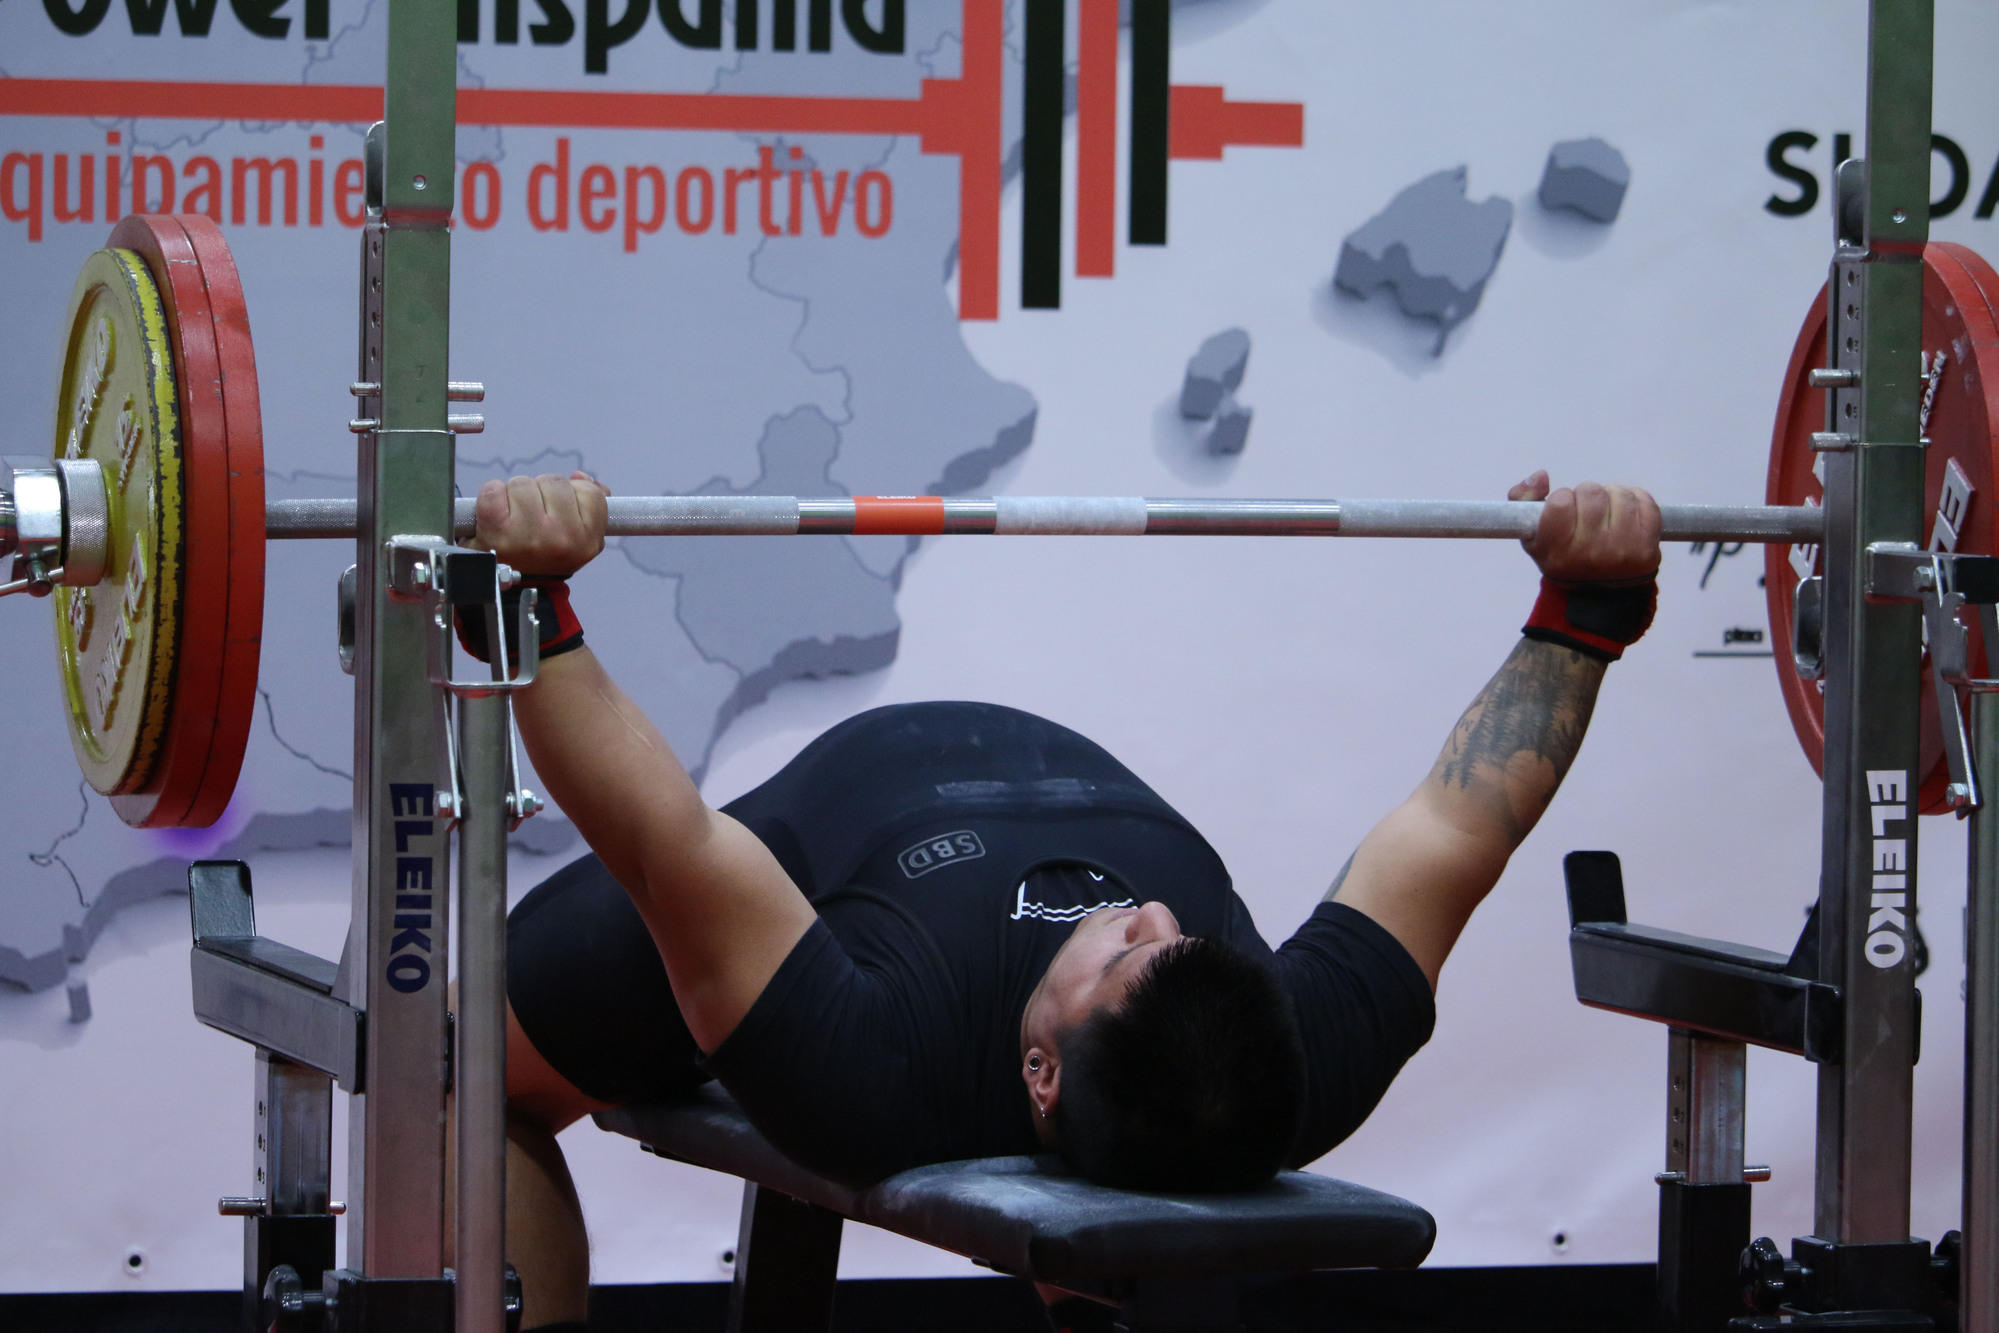 Images Powerlifting Barcelona